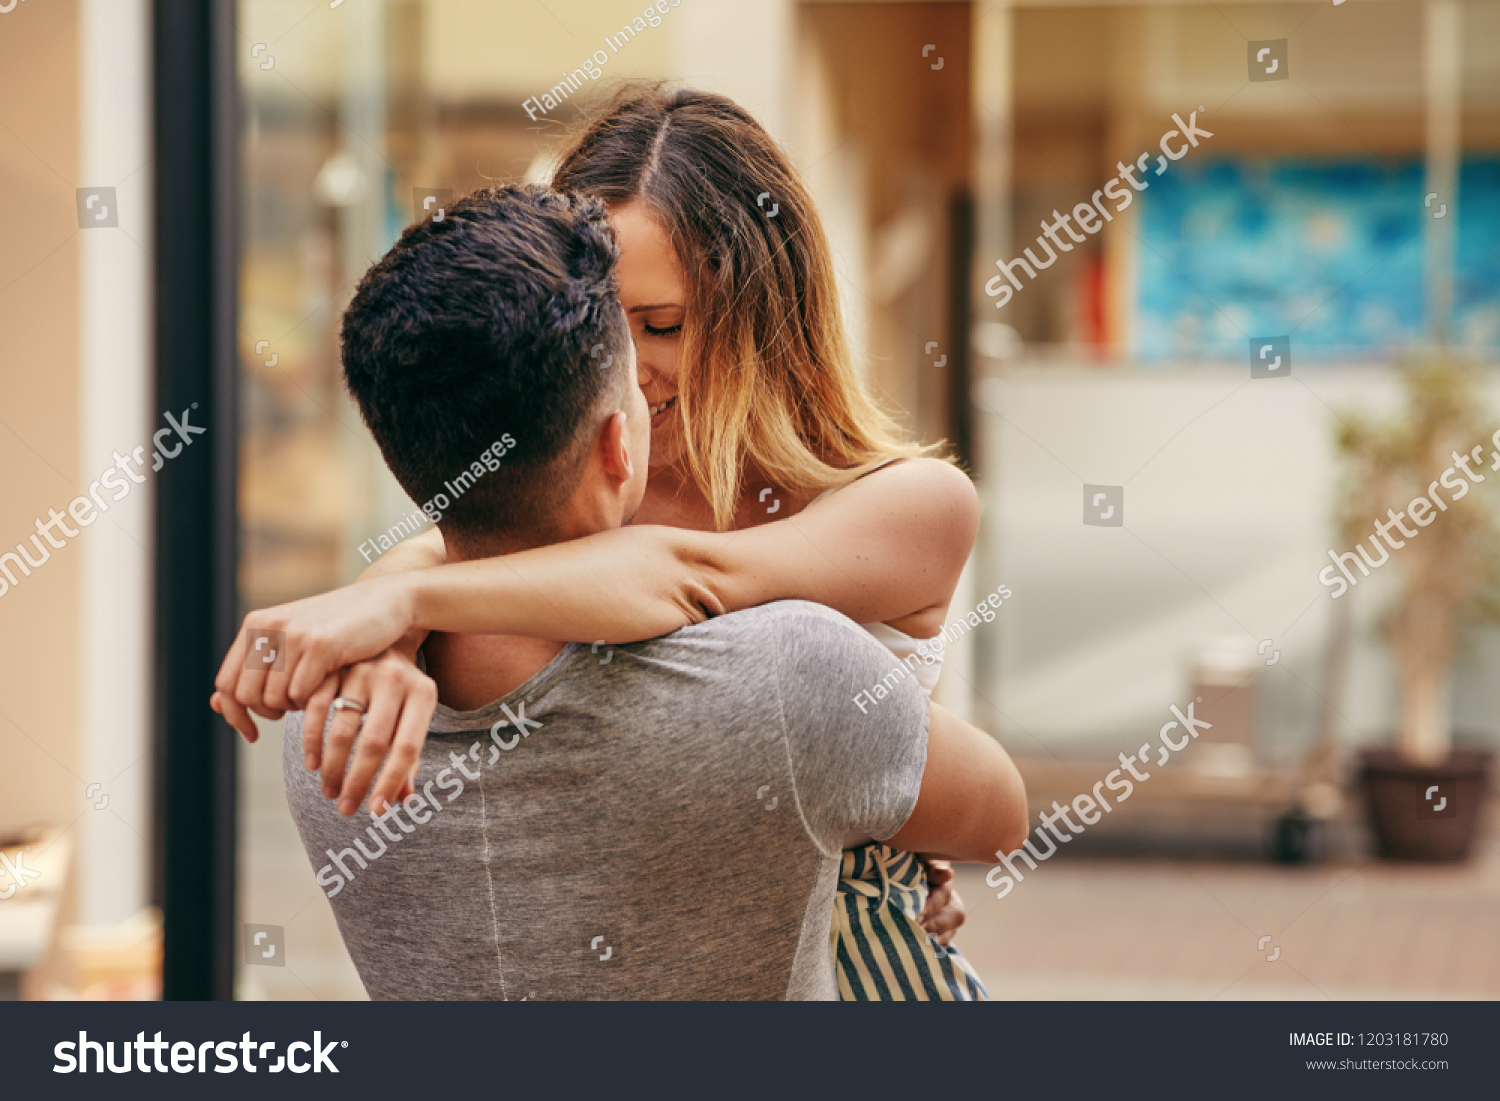 Affectionate Young Couple Embracing Sharing Romantic の写真素材 今すぐ編集